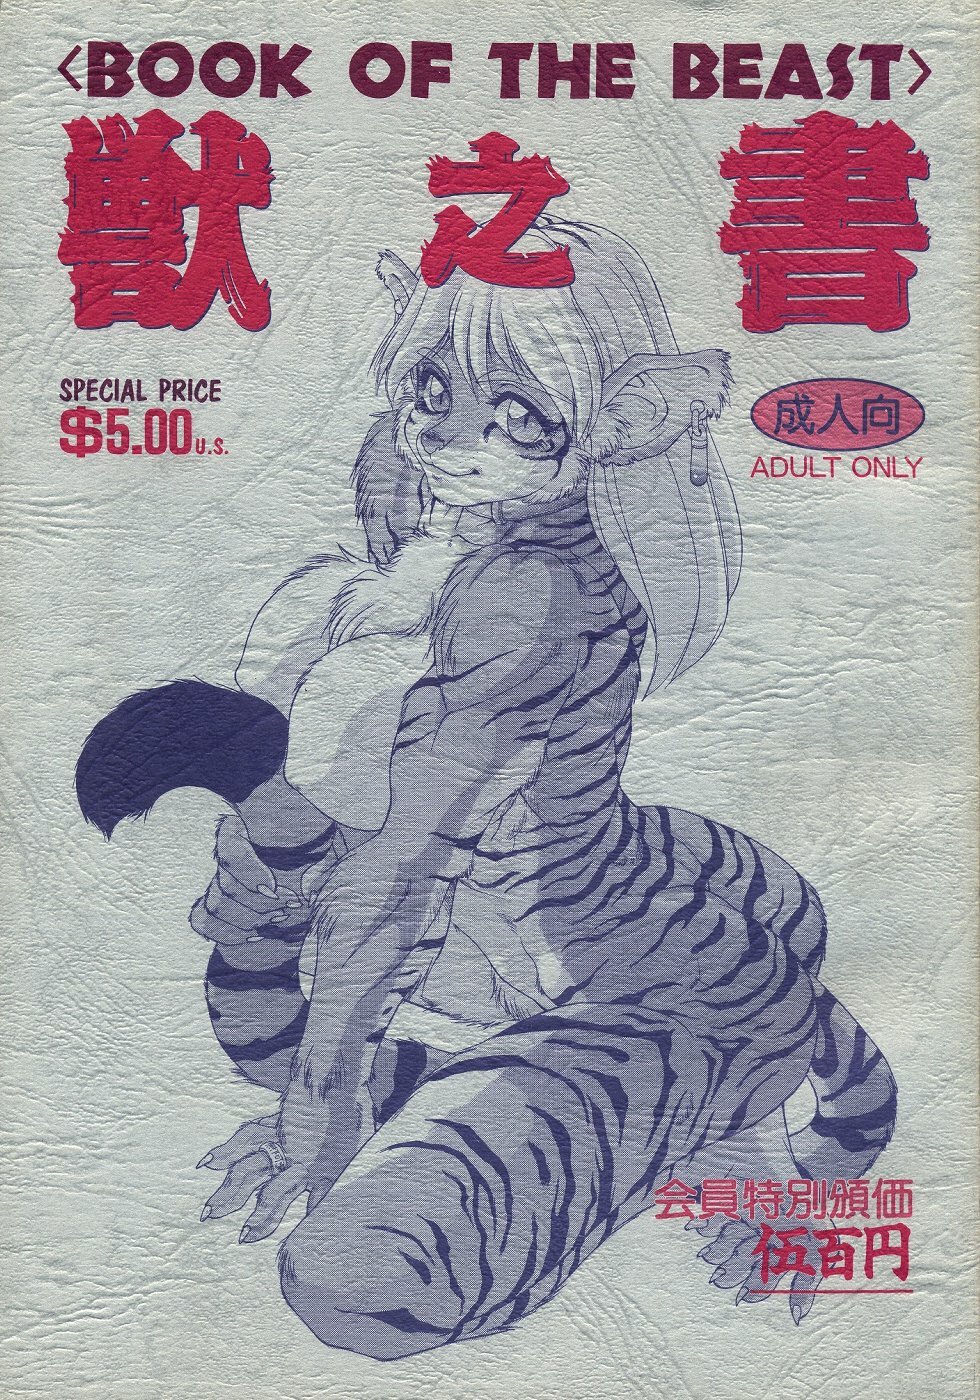 (C47) [TEAM SHUFFLE (Various)] Kemono no Sho - Book of The Beast page 1 full